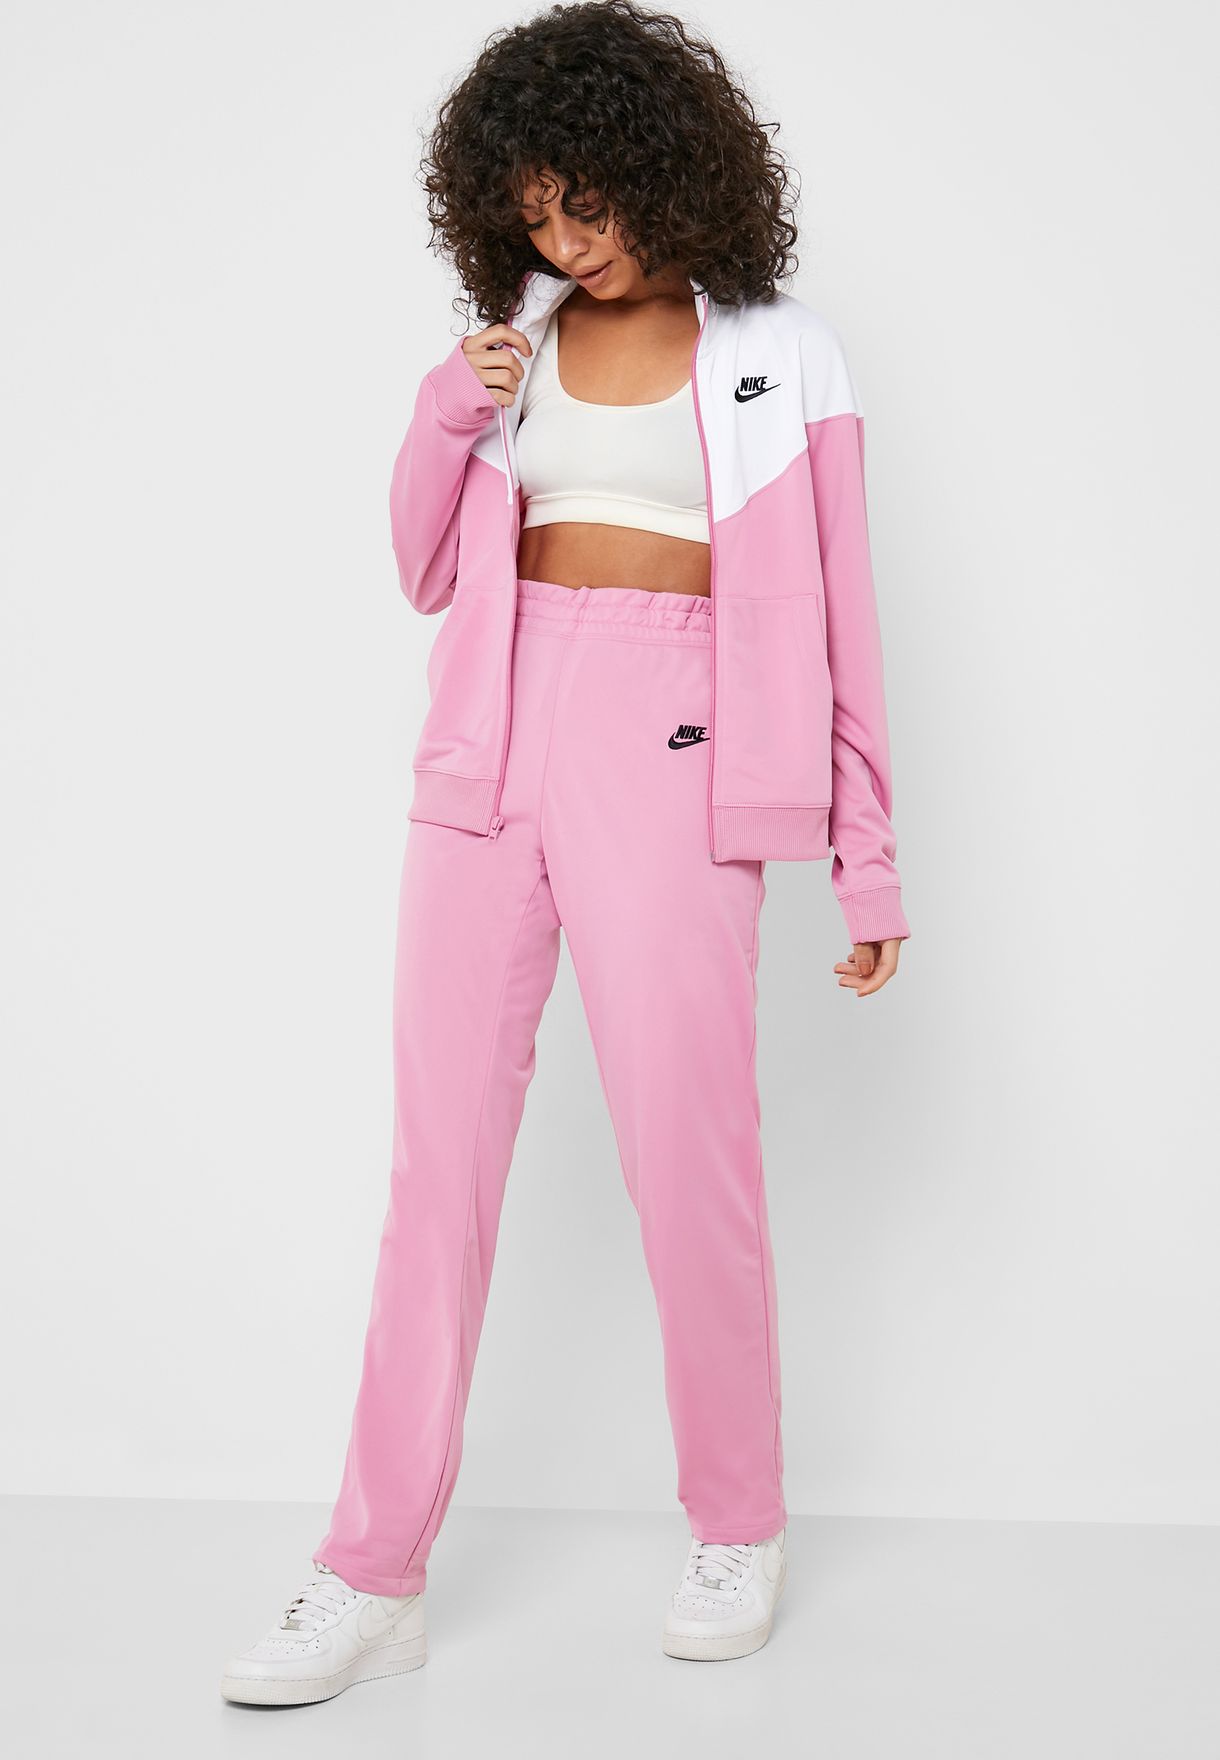 baby pink nike tracksuit womens